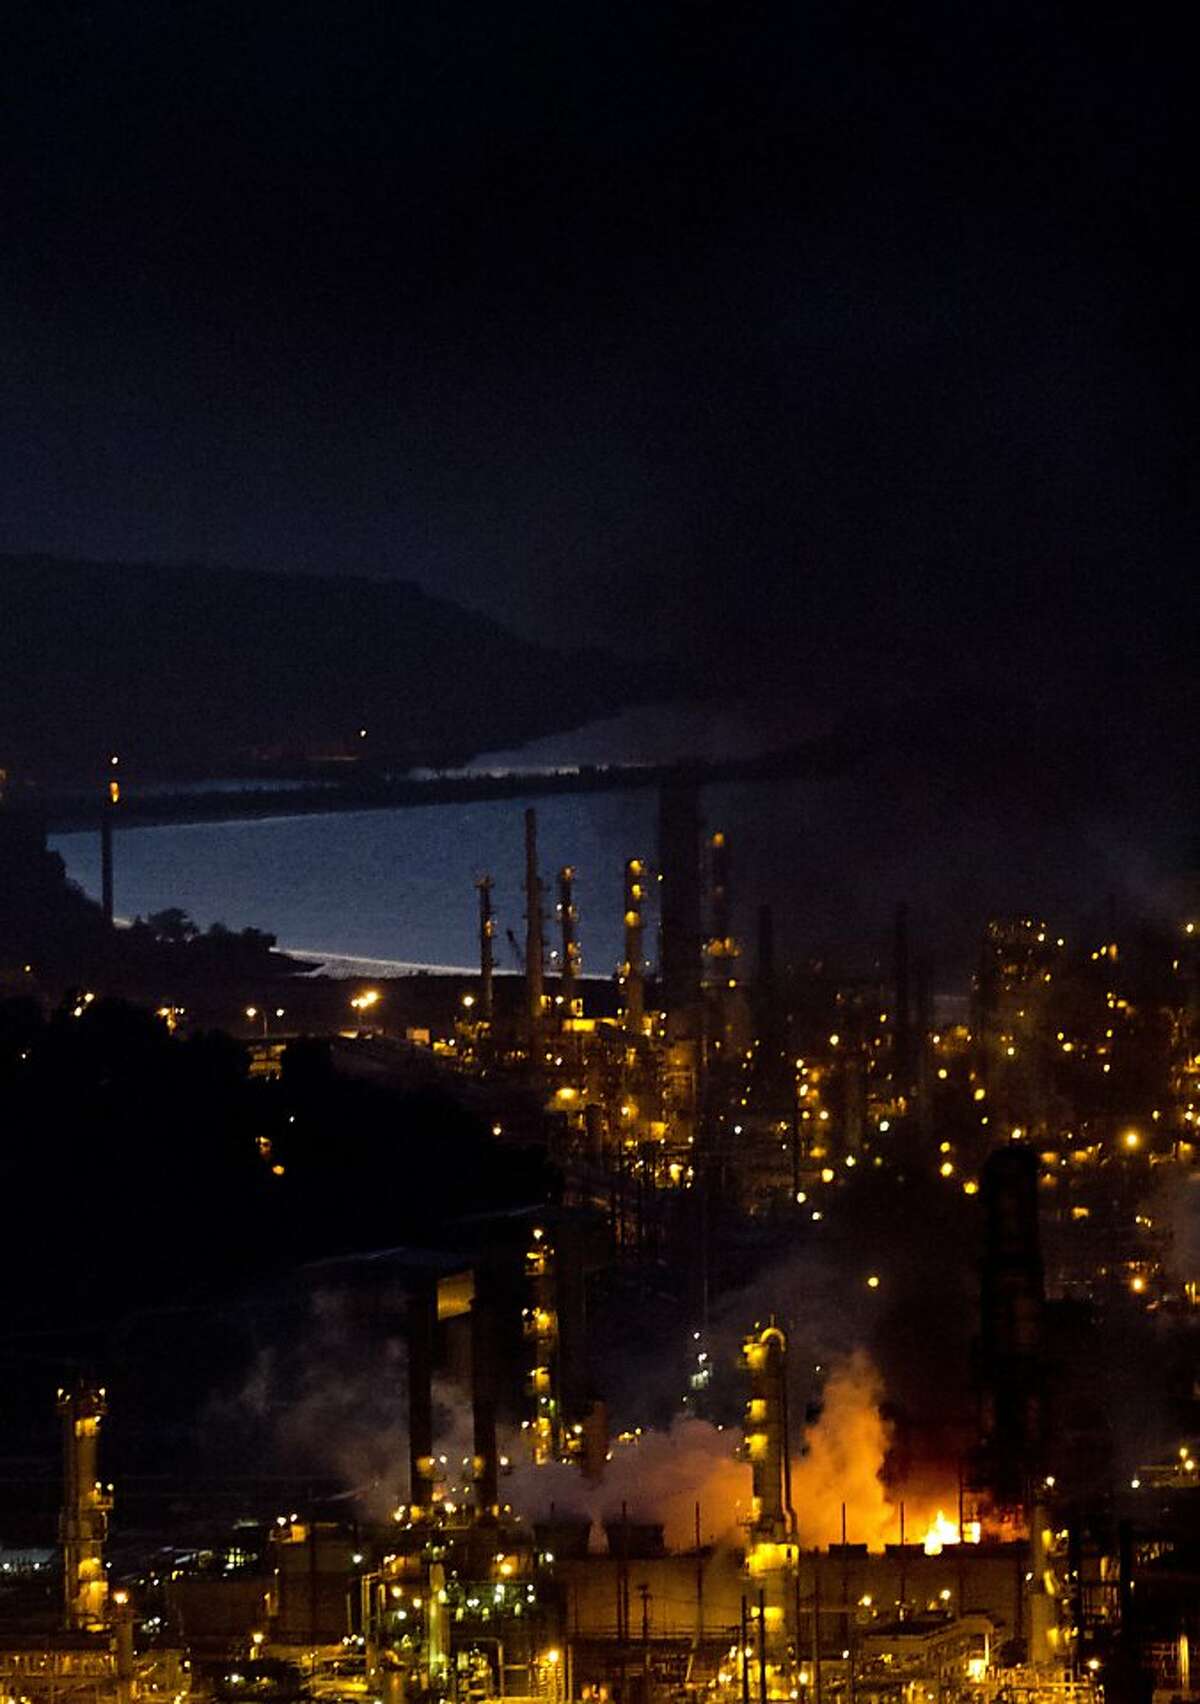 Smoke bellows from a fire at the Chevron refinery following an explosion at 6:30 on Monday, August 6, 2012 in Richmond, Calif.